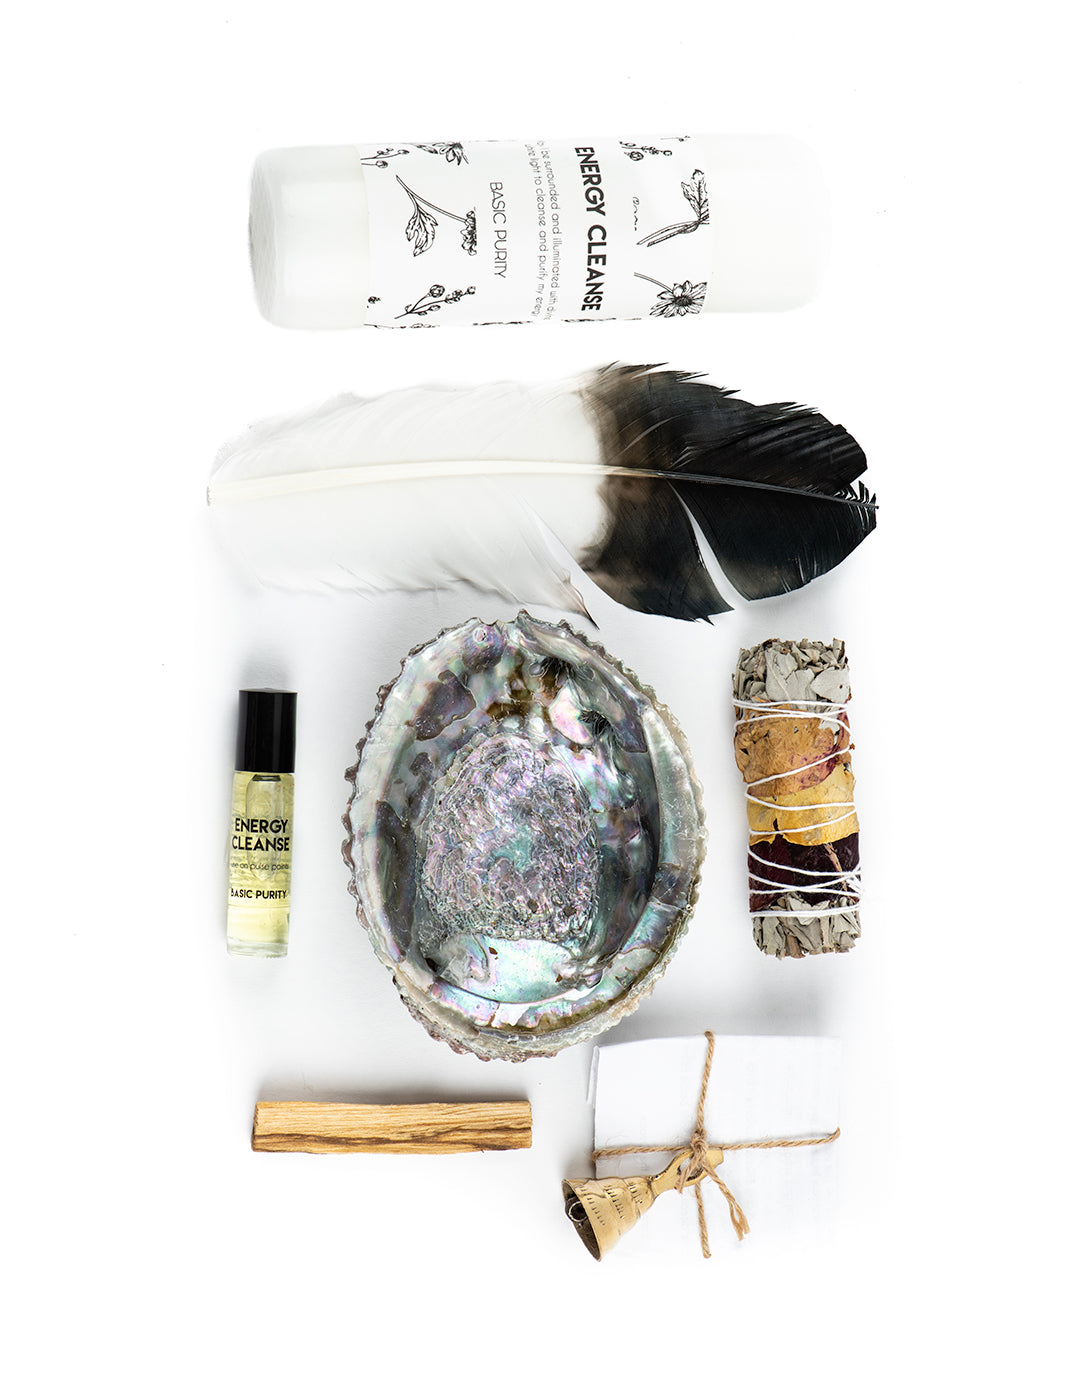 The energy cleansing kit by Mary Armendarez. This includes eagle feather, white candle, abalone shell, cedar/ sage bundle, bell, energy cleanse roll on, quartz crystal, Santo Palo stick, lavender bouquet, and ritual instructions.